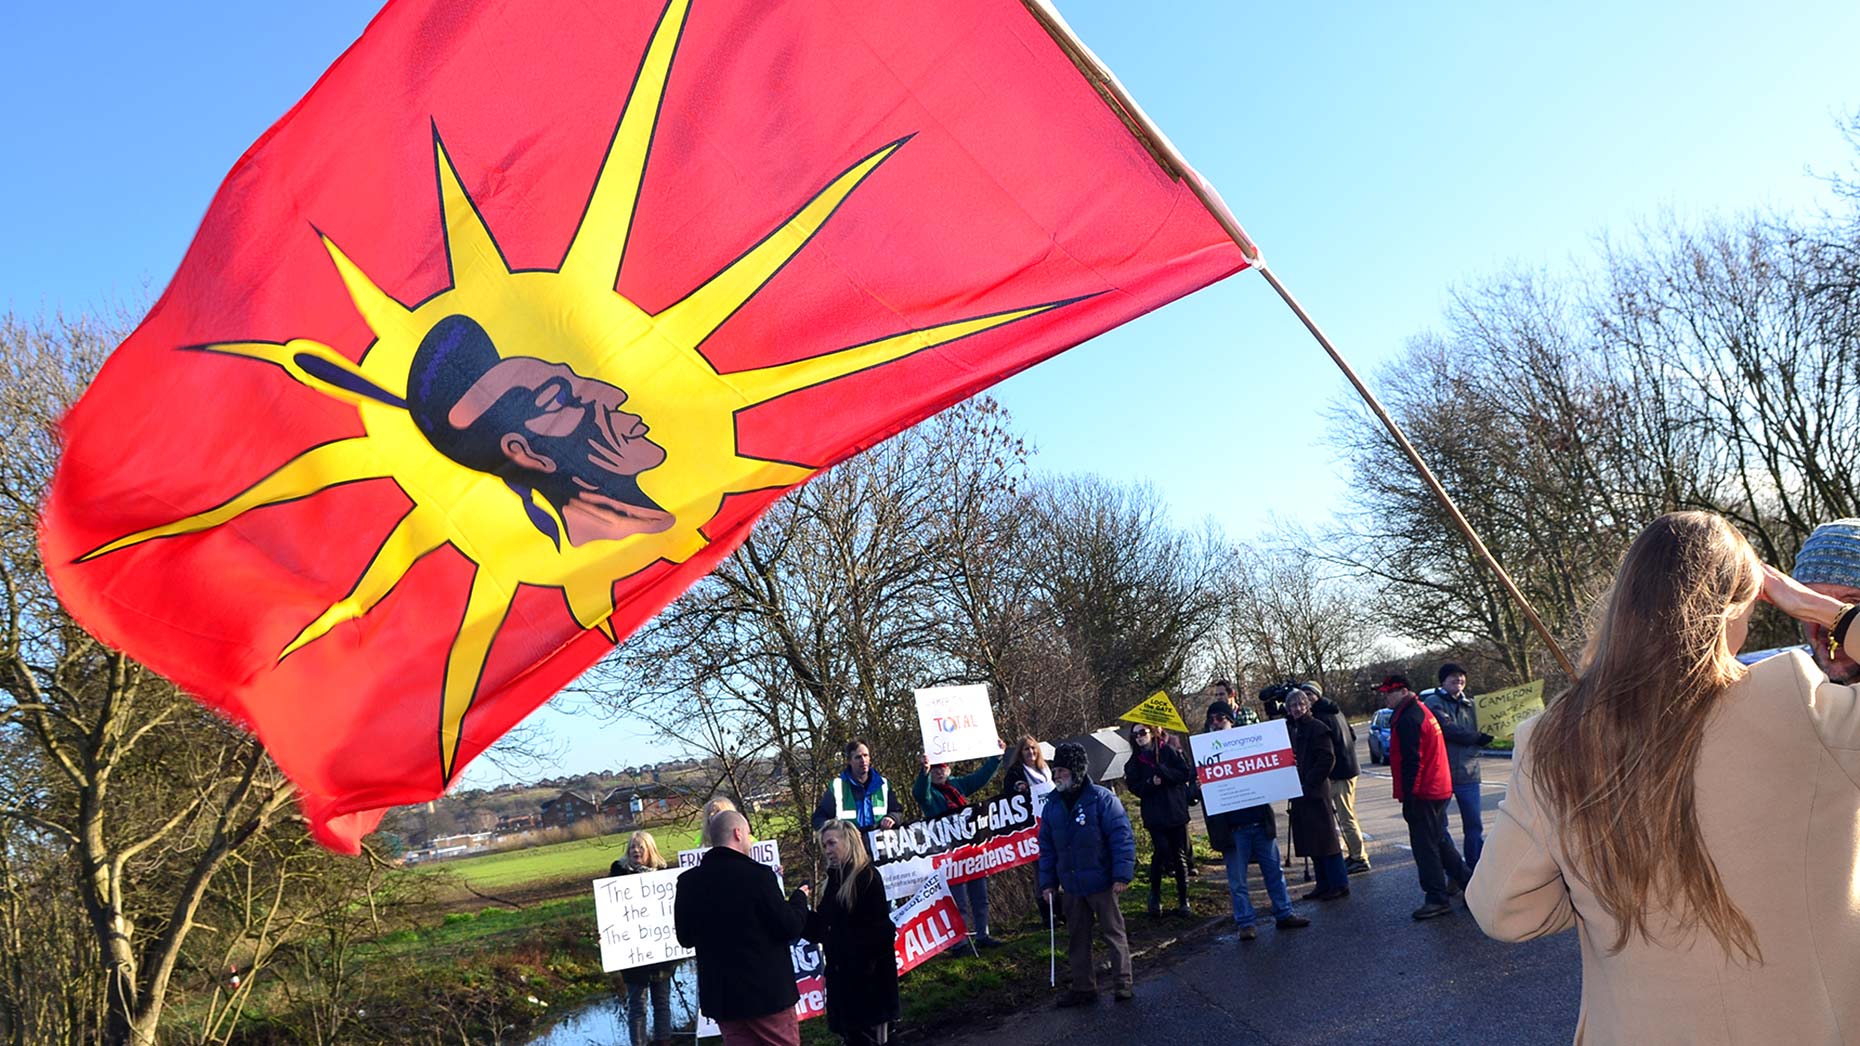 Anti-fracking protest near Gainsborough in Lincolnshire. Photo: Steve Smailes for The Lincolnite